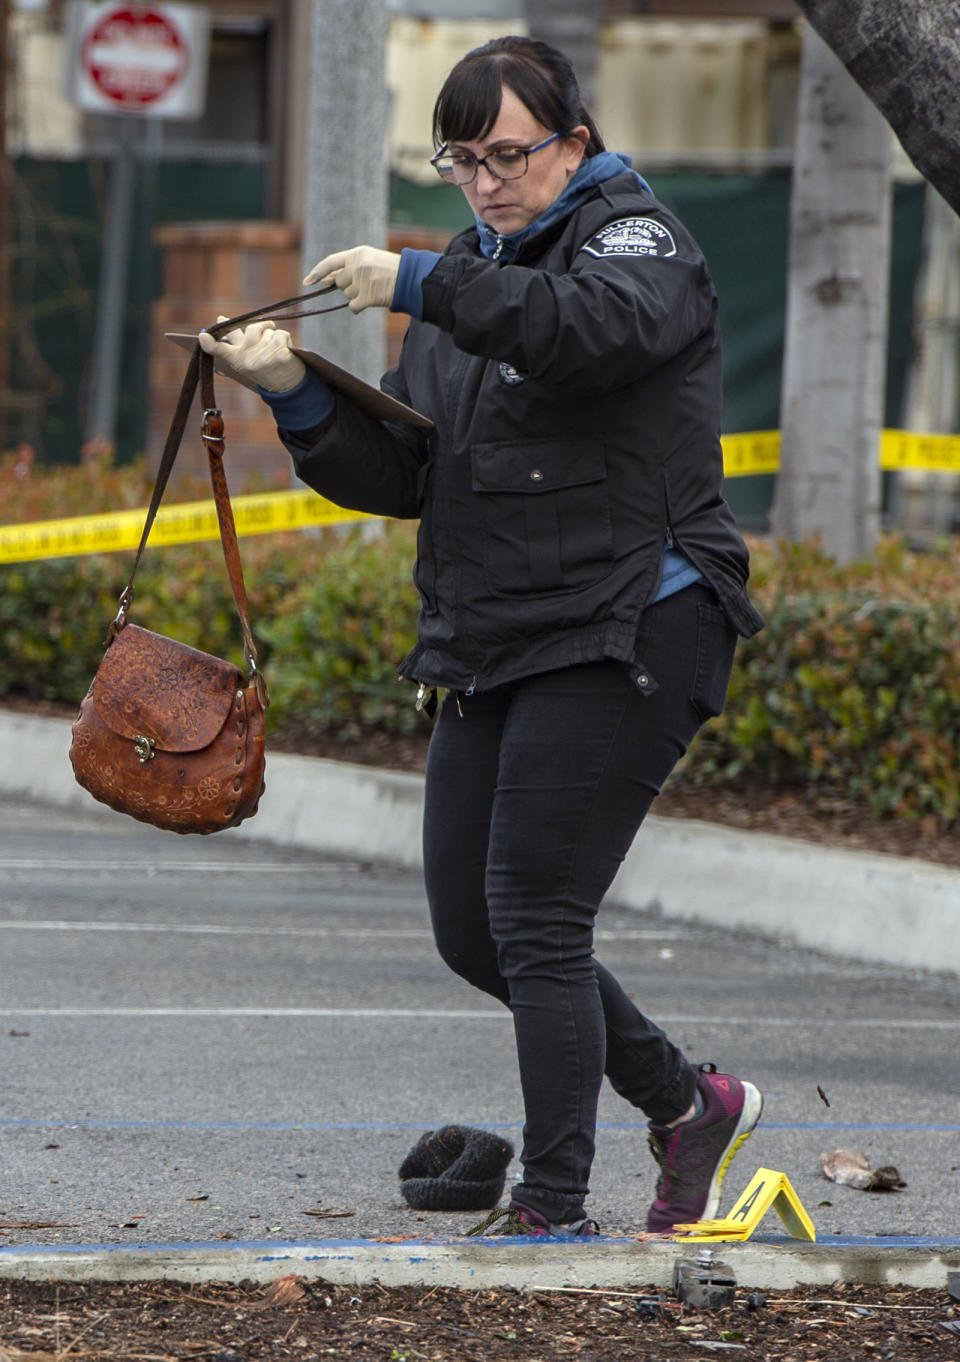 Heather Barclay, an accident investigator with the Fullerton Police Department, recovers a purse that was lodged underneath a pickup truck in the aftermath of a car accident, Sunday, Feb. 10, 2019, in Fullerton, Calif. Authorities say a suspected drunken driver was arrested after his pickup truck plowed into a crowd on a sidewalk, injuring multiple people, including some victims who were trapped under the vehicle. (Mindy Schauer/The Orange County Register via AP)